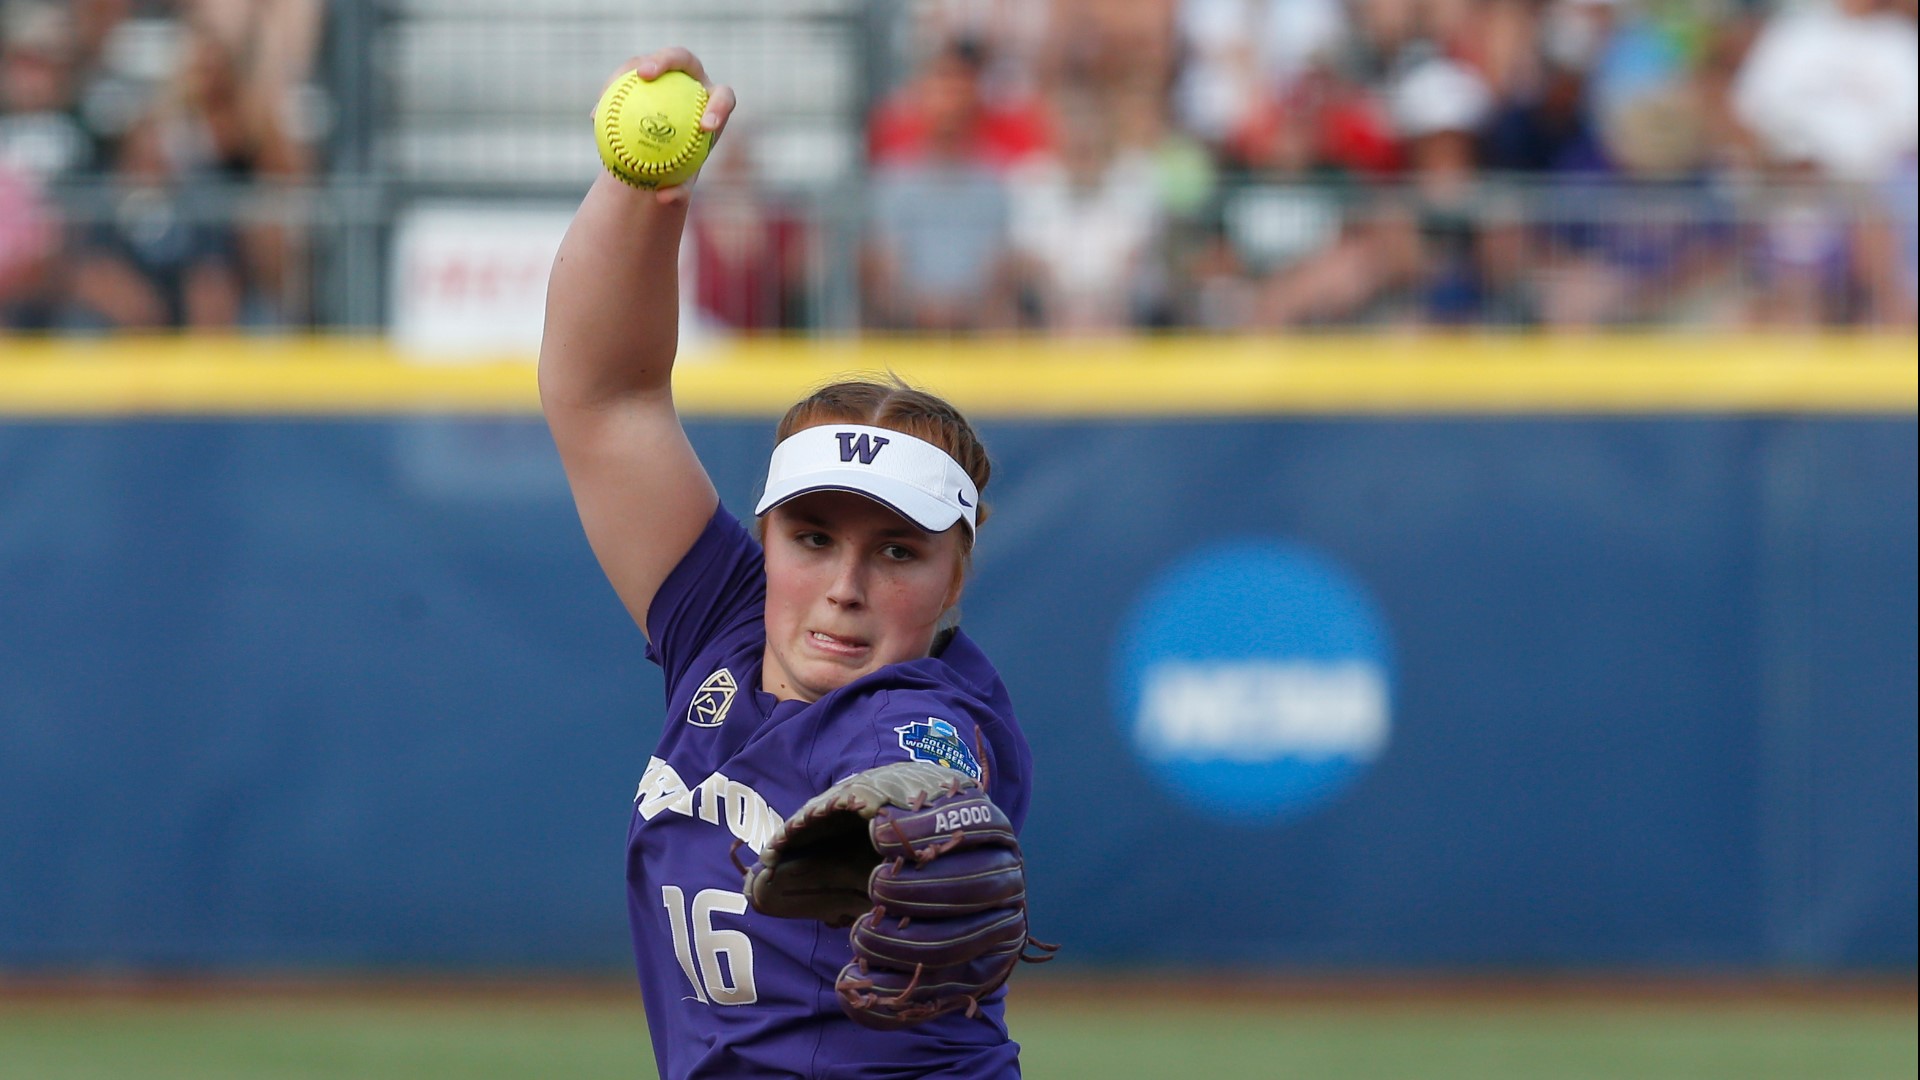 UW's Gabbie Plain is making her mark on American softball, but now her sights are set on making the Australian Olympics team this summer.